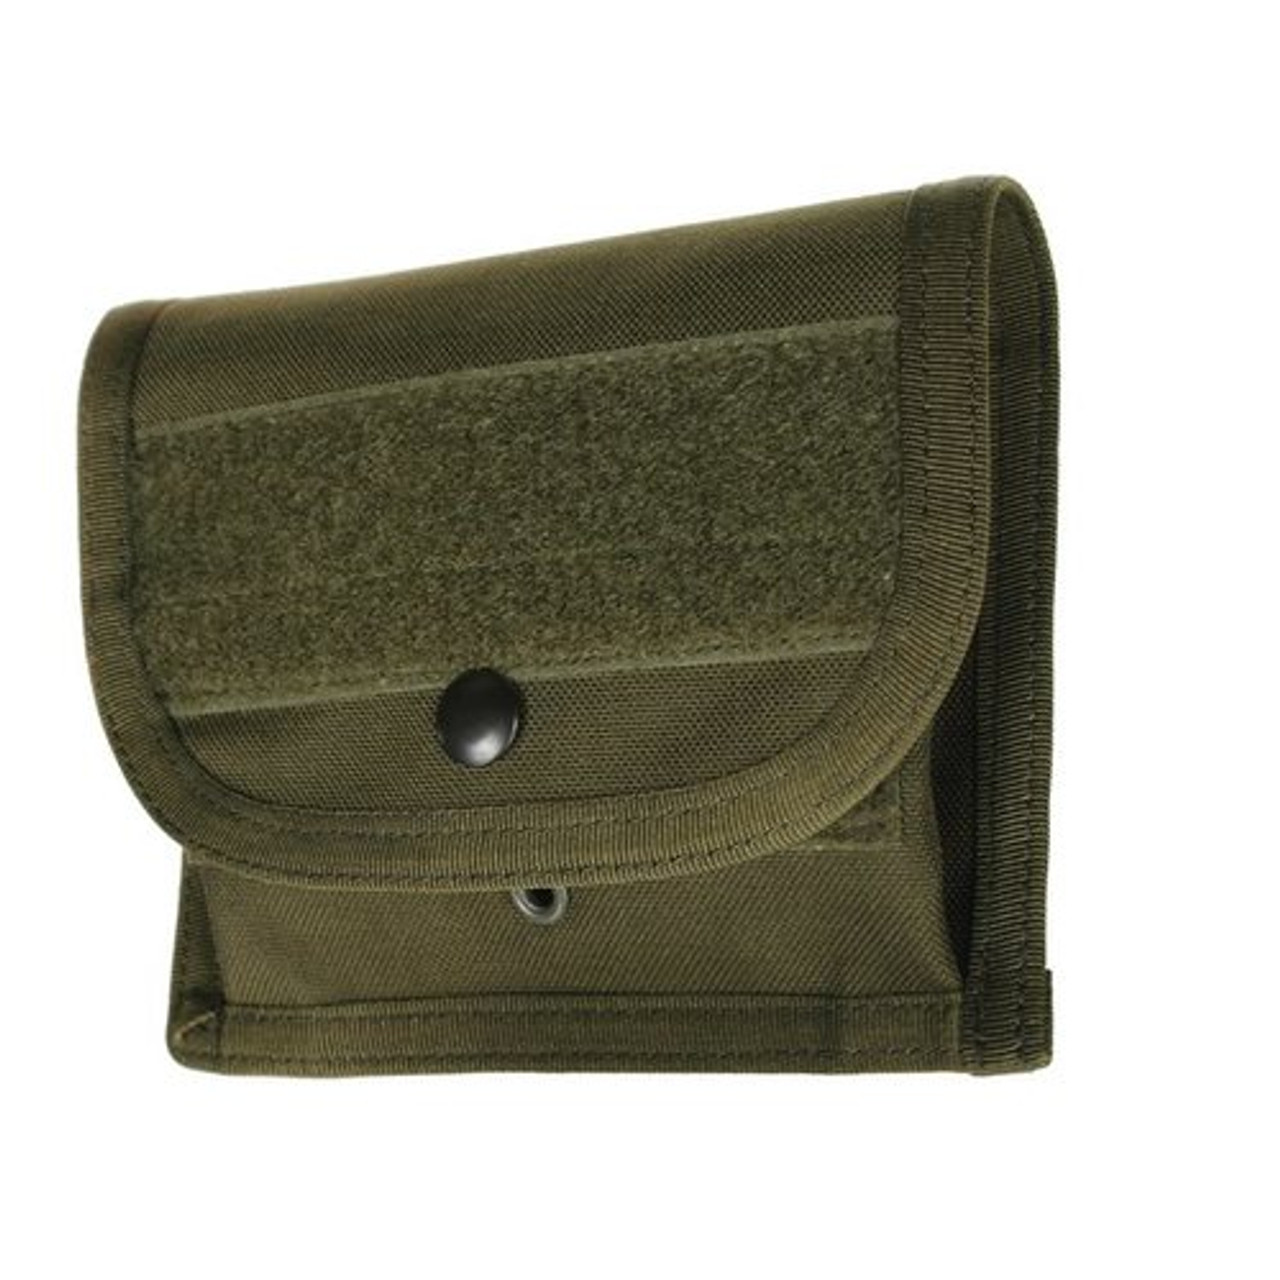 BLACKHAWK 37CL45 SMALL UTILITY POUCH - MOLLE, Mounts to any S.T.R.I.K.E. or PALS/MOLLE platform